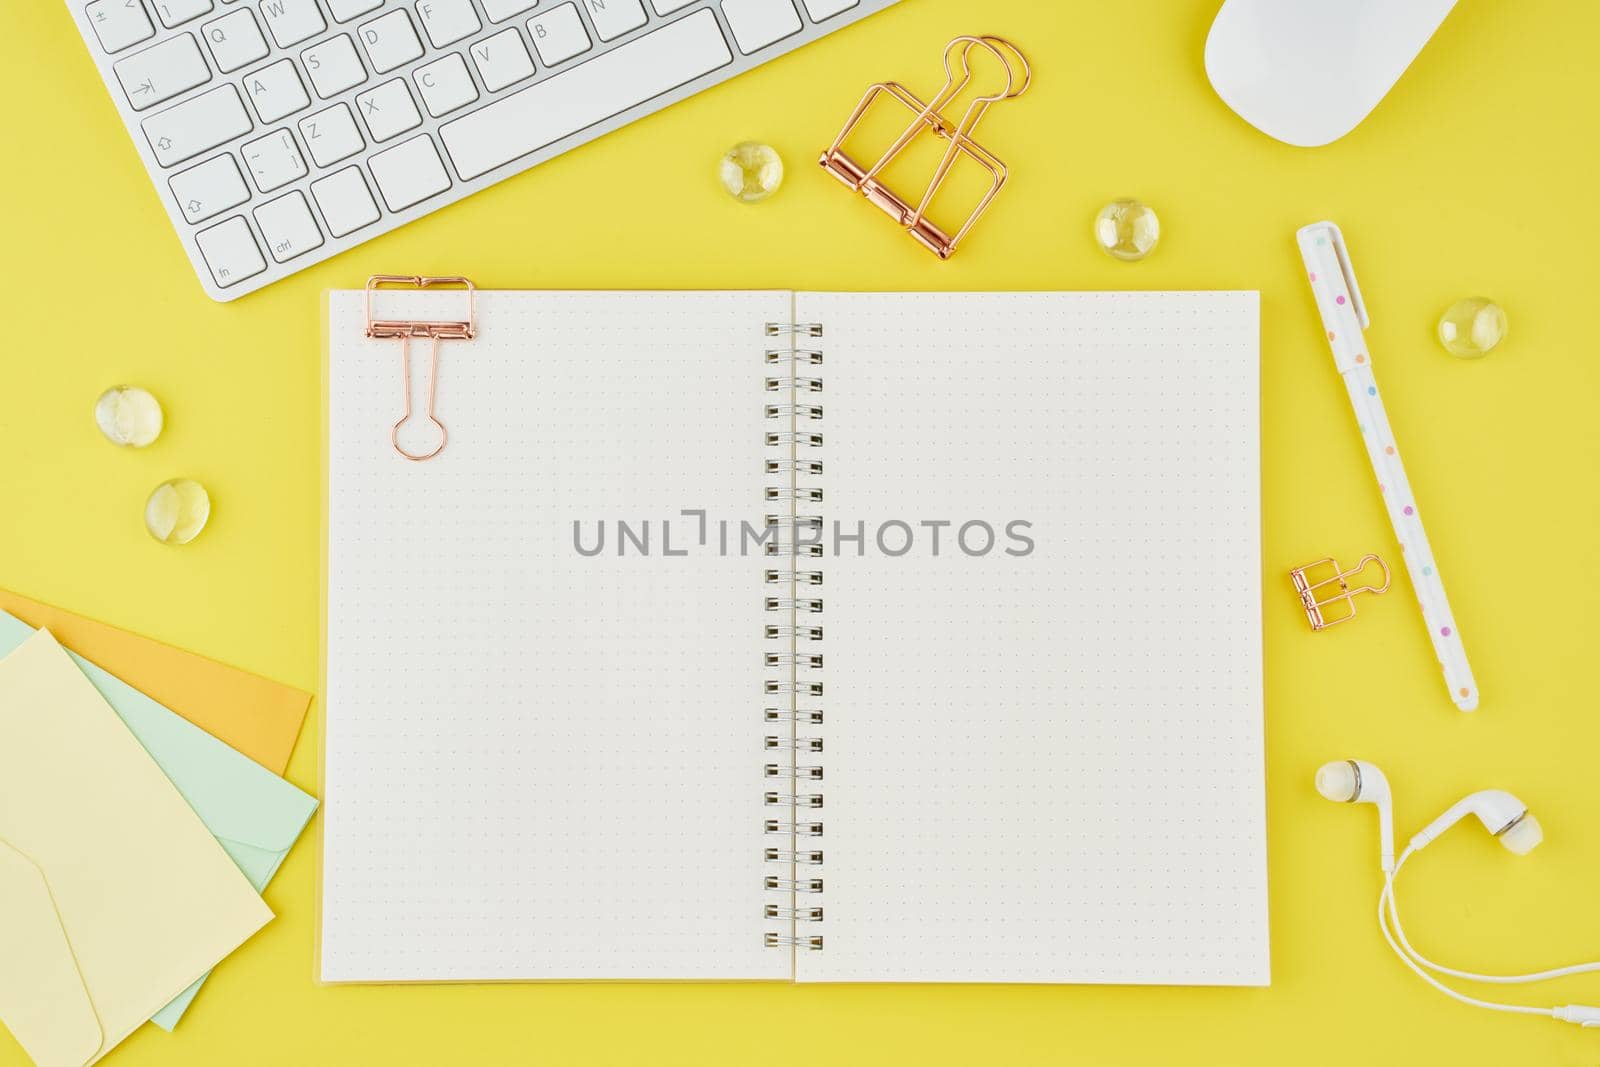 Blank notepad page in bullet journal on bright yellow office desktop. Top view of a modern bright table with notebook, stationery. Mock up, copy space, concept for diary